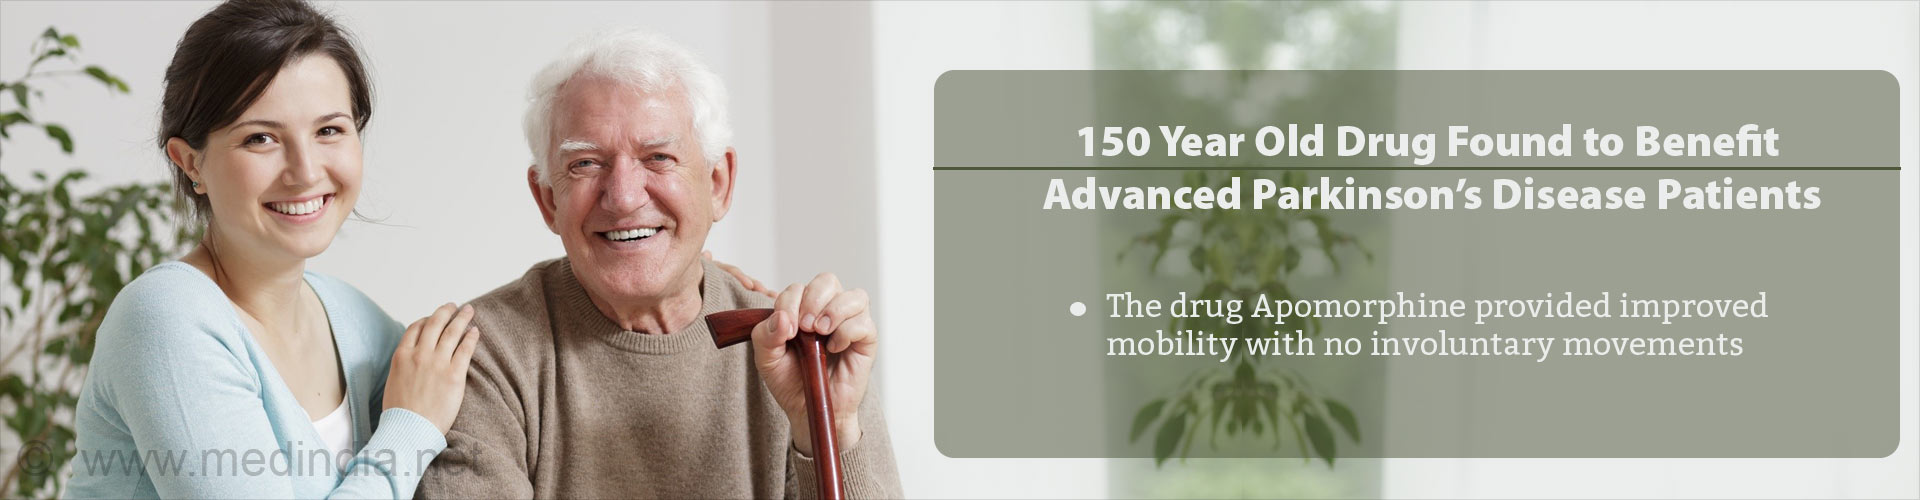 150 year old drug found to benefit advanced Parkinson's Disease patients
- The drug Apomorphine provides improved mobility with no involuntary movements